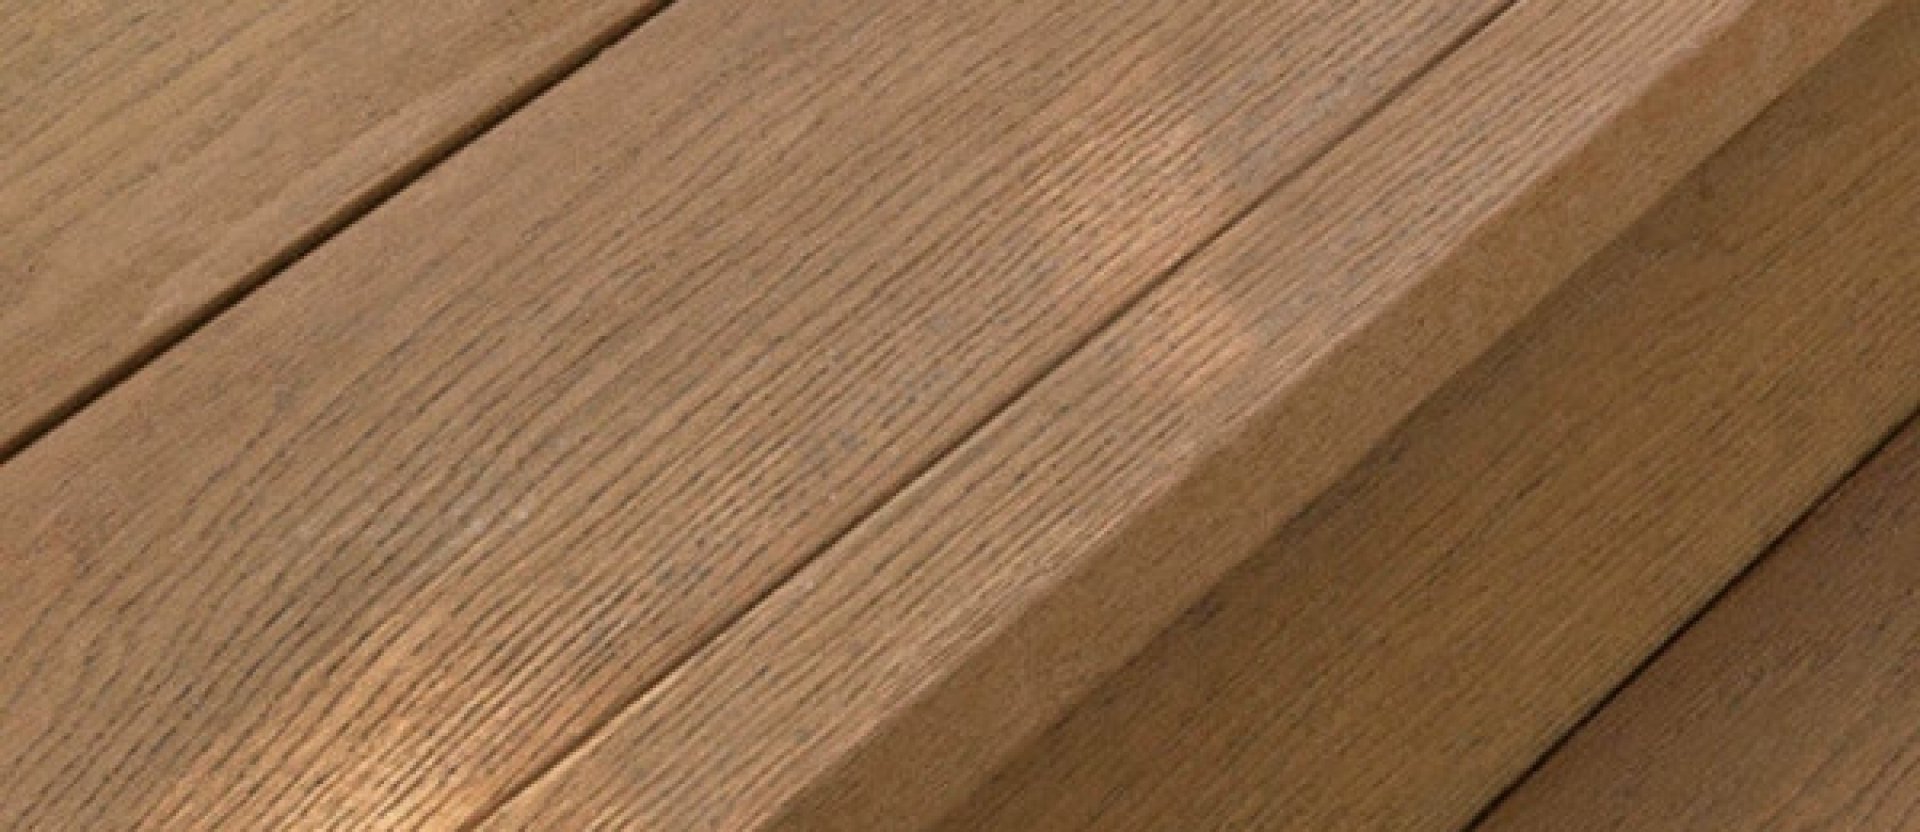 Millboard core colour is changing